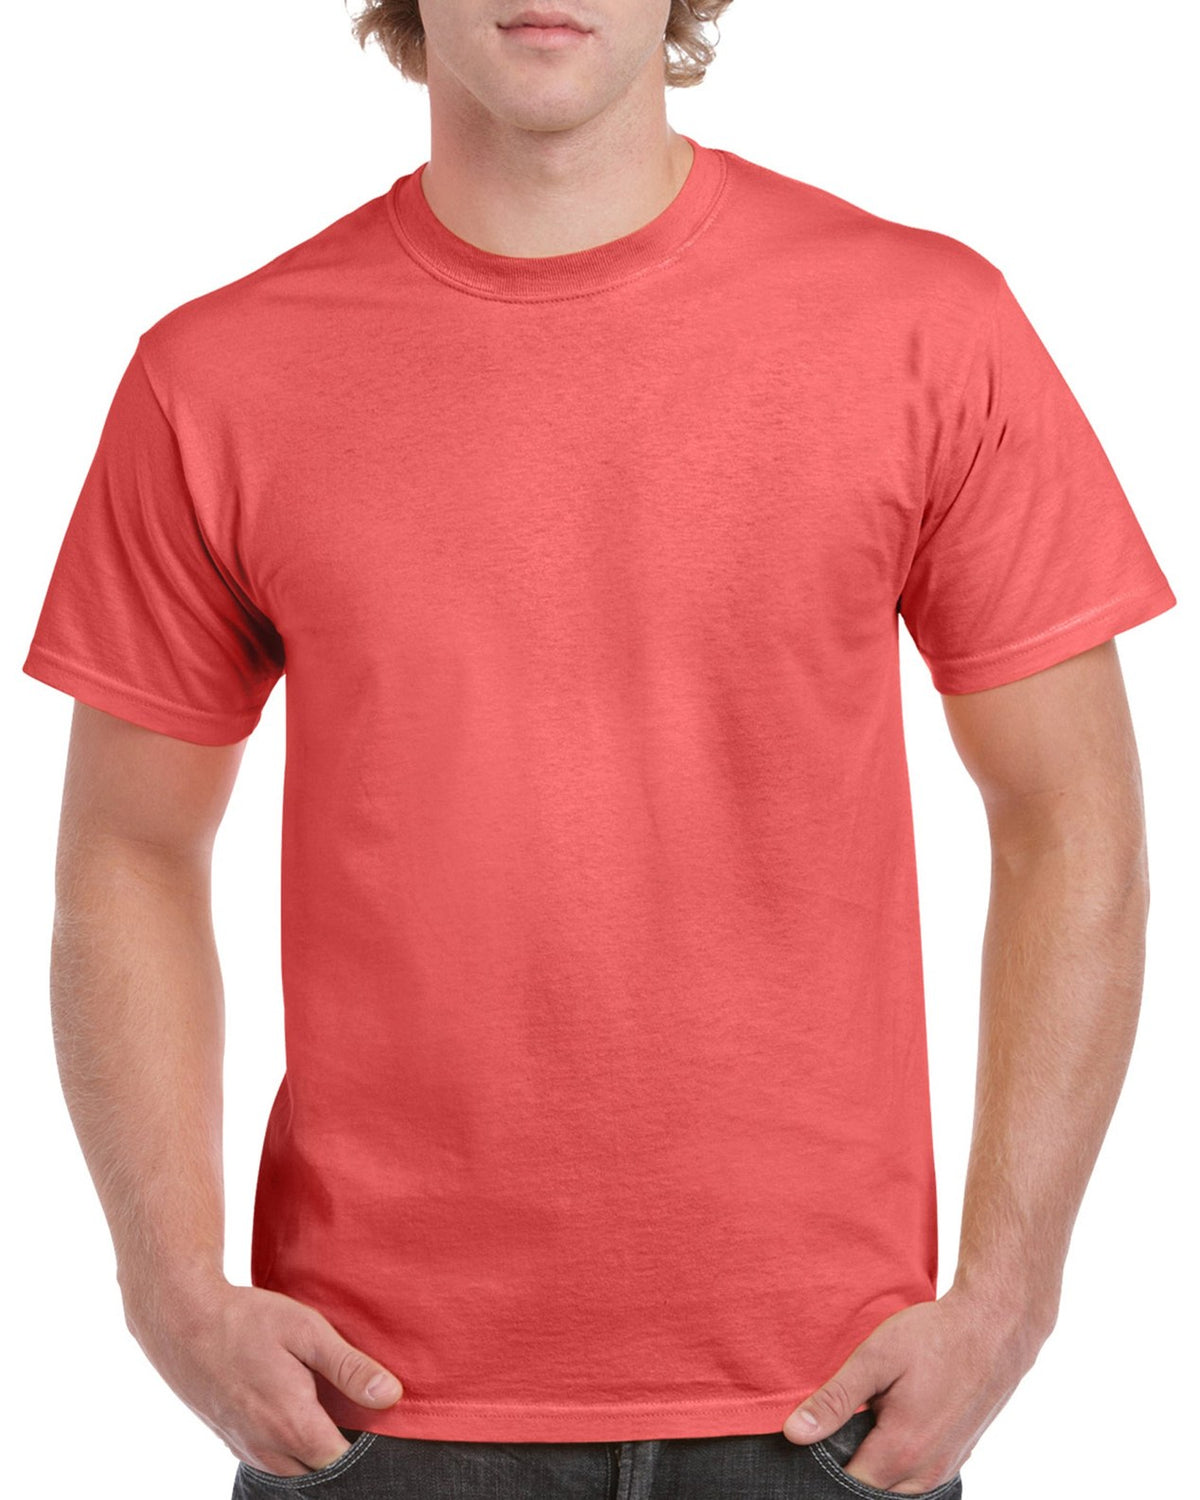 Baby T-Shirt Coral Cotton Jersey